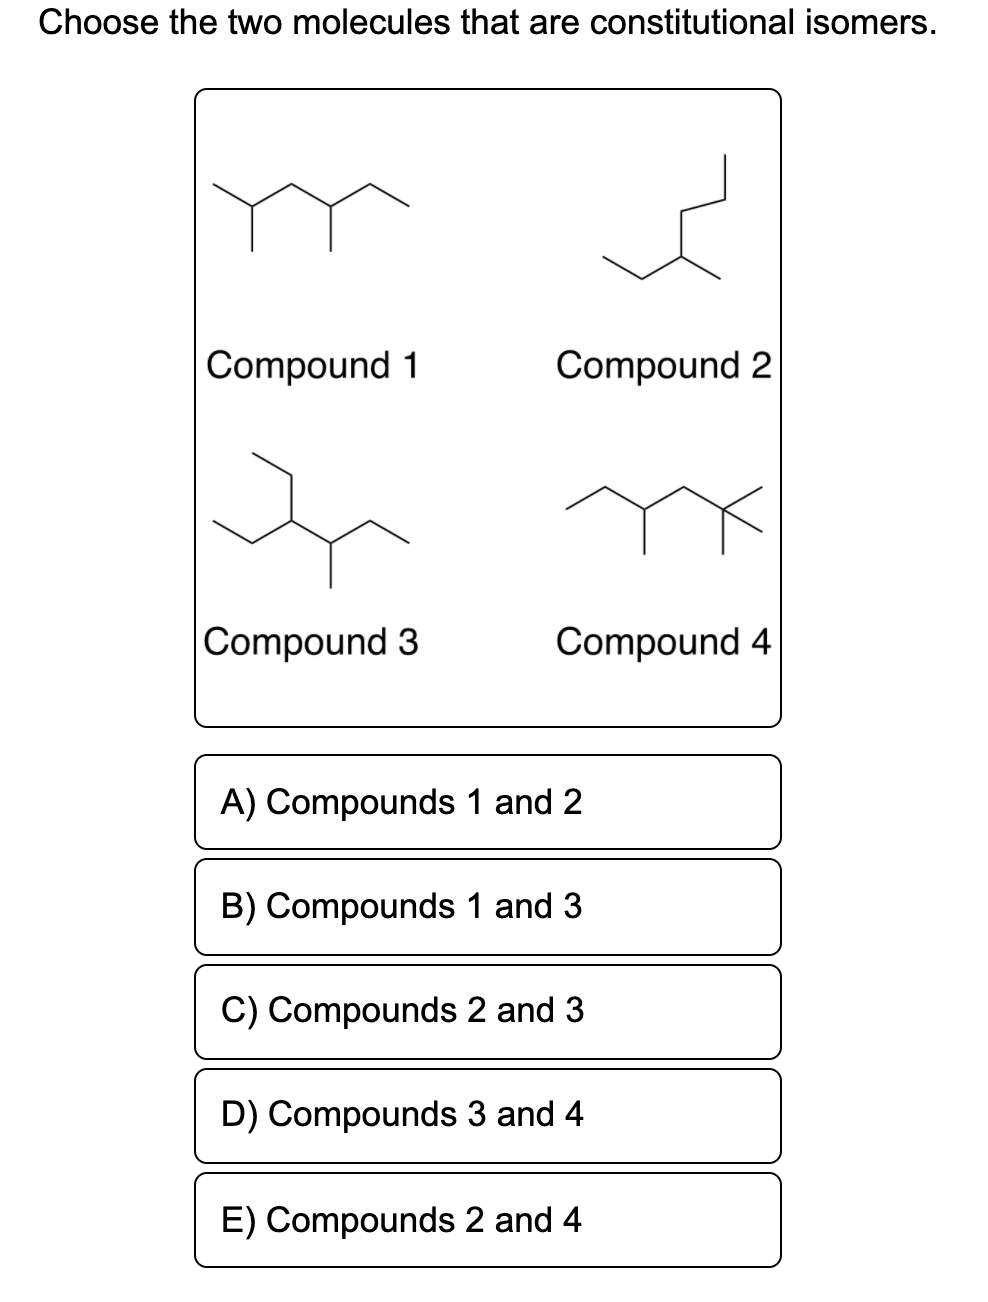 Choose the two molecules that are constitutional isomers.
m
Compound 1
Compound 2
Compound 3
Compound 4
A) Compounds 1 and 2
B) Compounds 1 and 3
C) Compounds 2 and 3
D) Compounds 3 and 4
E) Compounds 2 and 4
